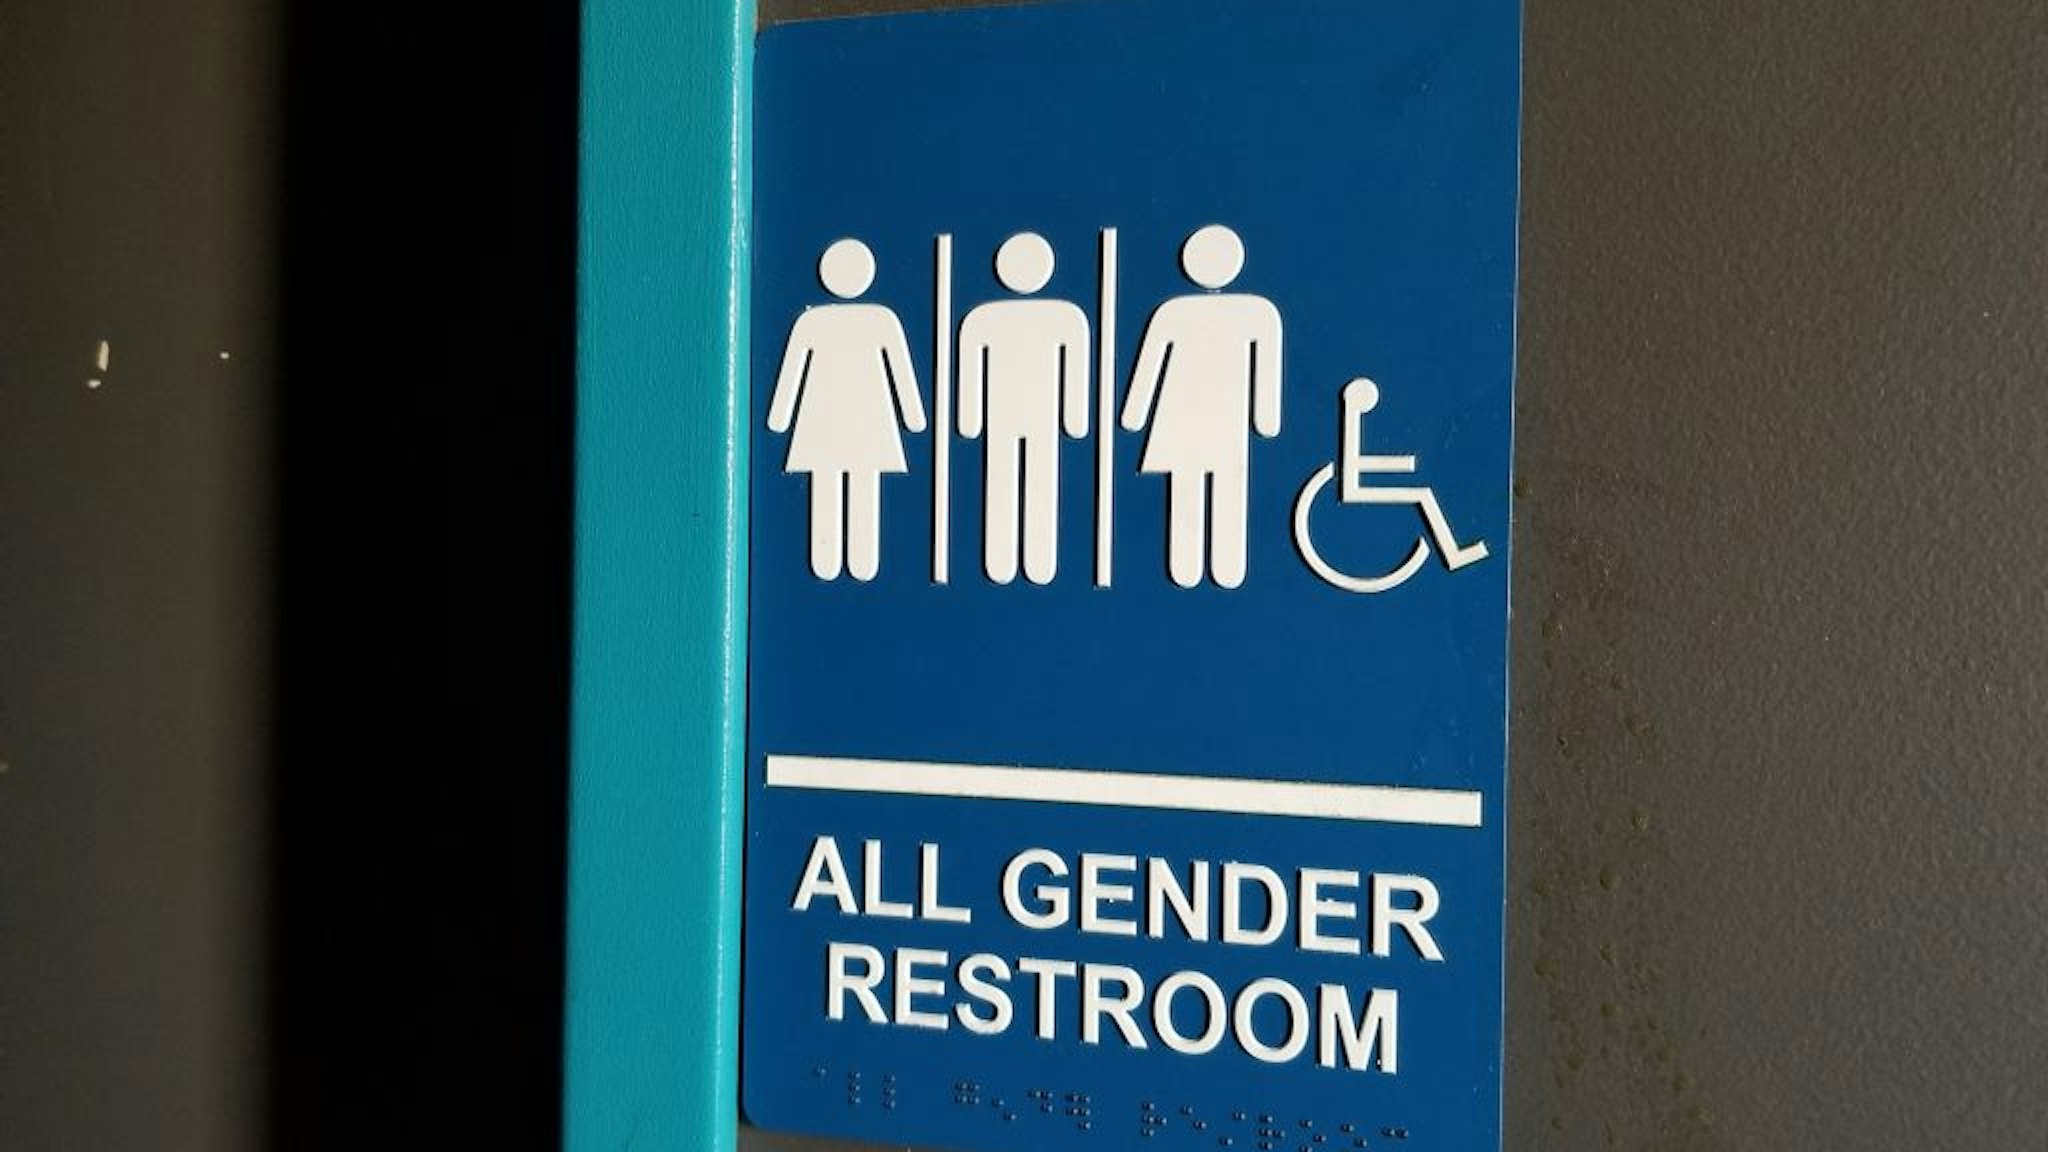 Close-up of sign for all gender restroom in Dublin, California, with male, female and gender-inclusive stick figure illustrations, March 13, 2019. (Photo by Smith Collection/Gado/Getty Images)